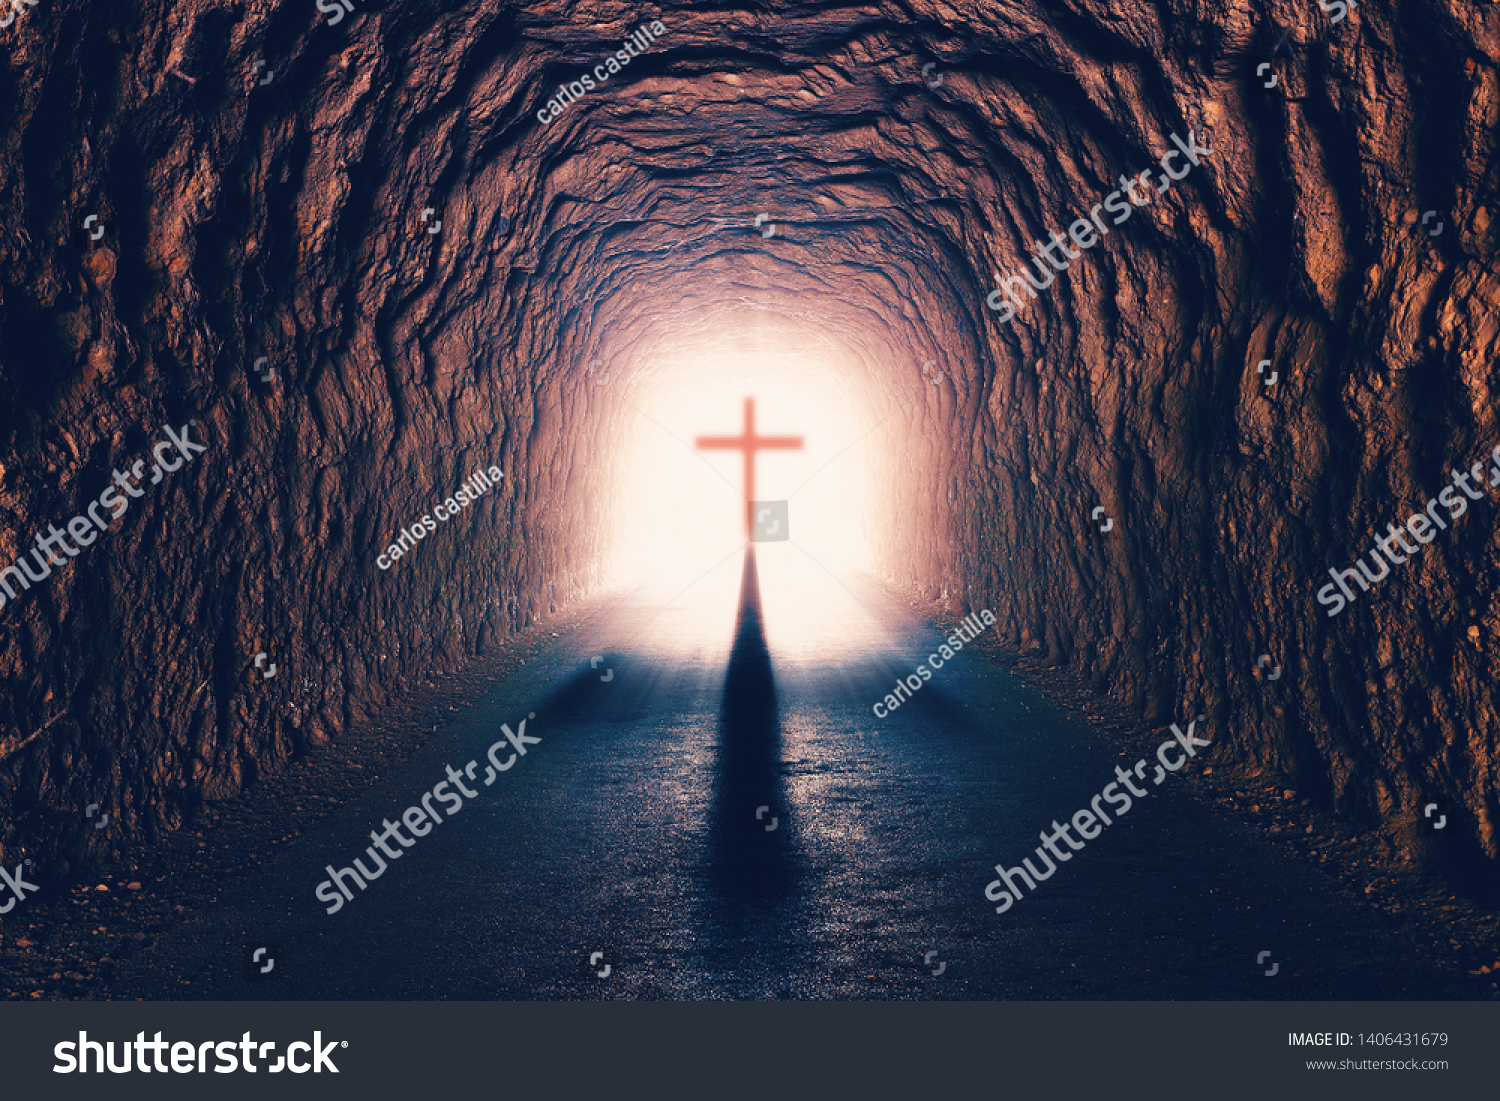 Science and religion. Christian religion. Illustration with cross of jesus christ and resurrection concept.Tunnel towards death